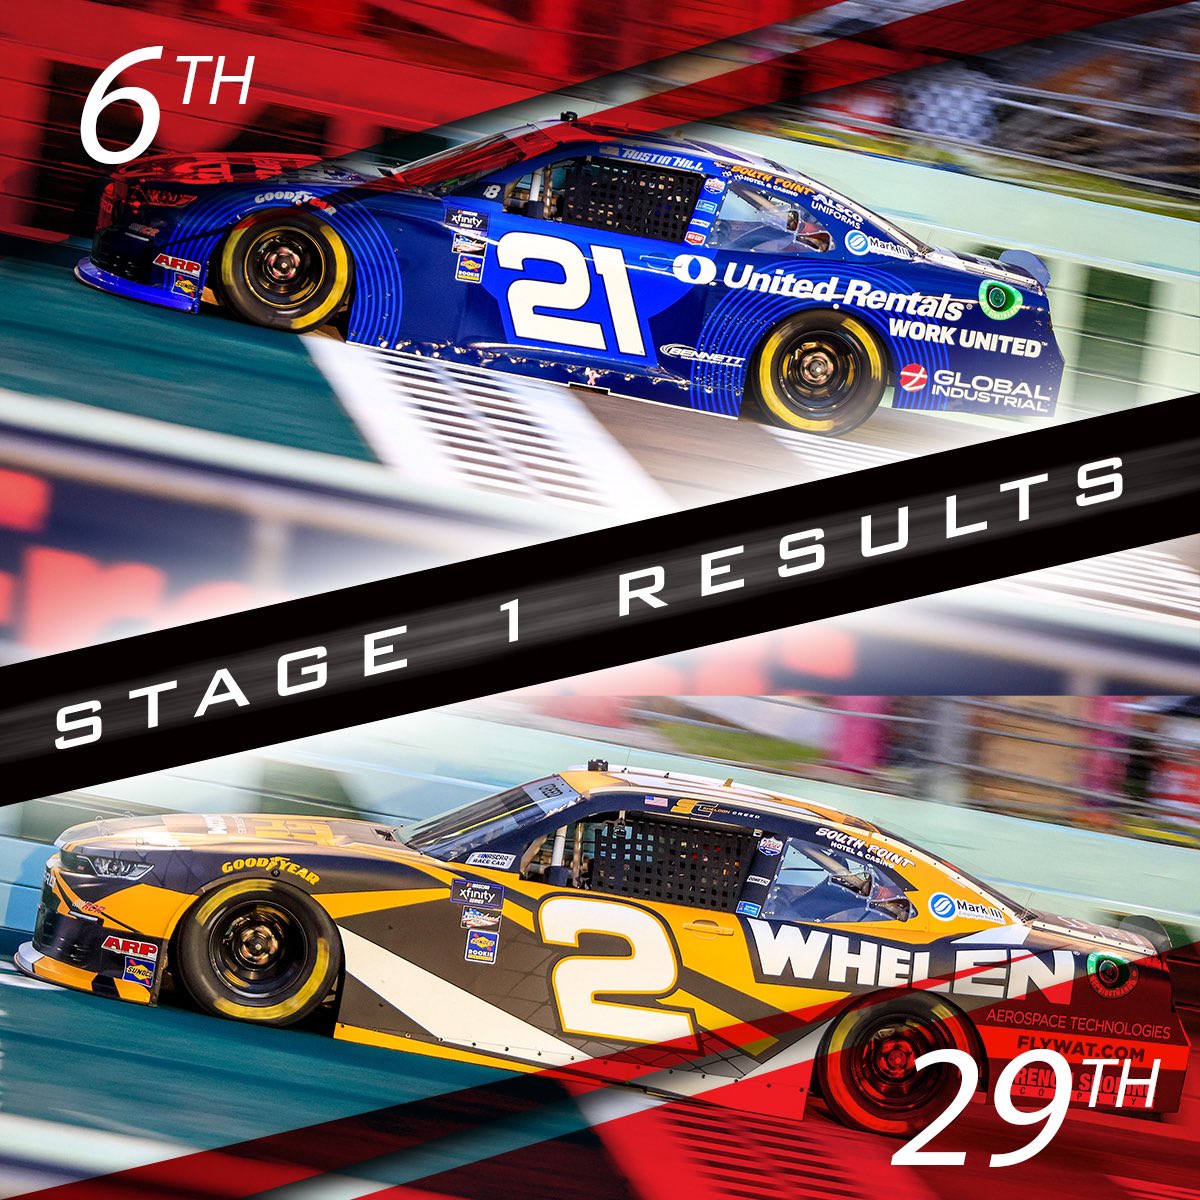 Stage 1 results: P6: @_AustinHill P29: @sheldoncreed @UnitedRentals | @fly_wat | @WhelenMTRS